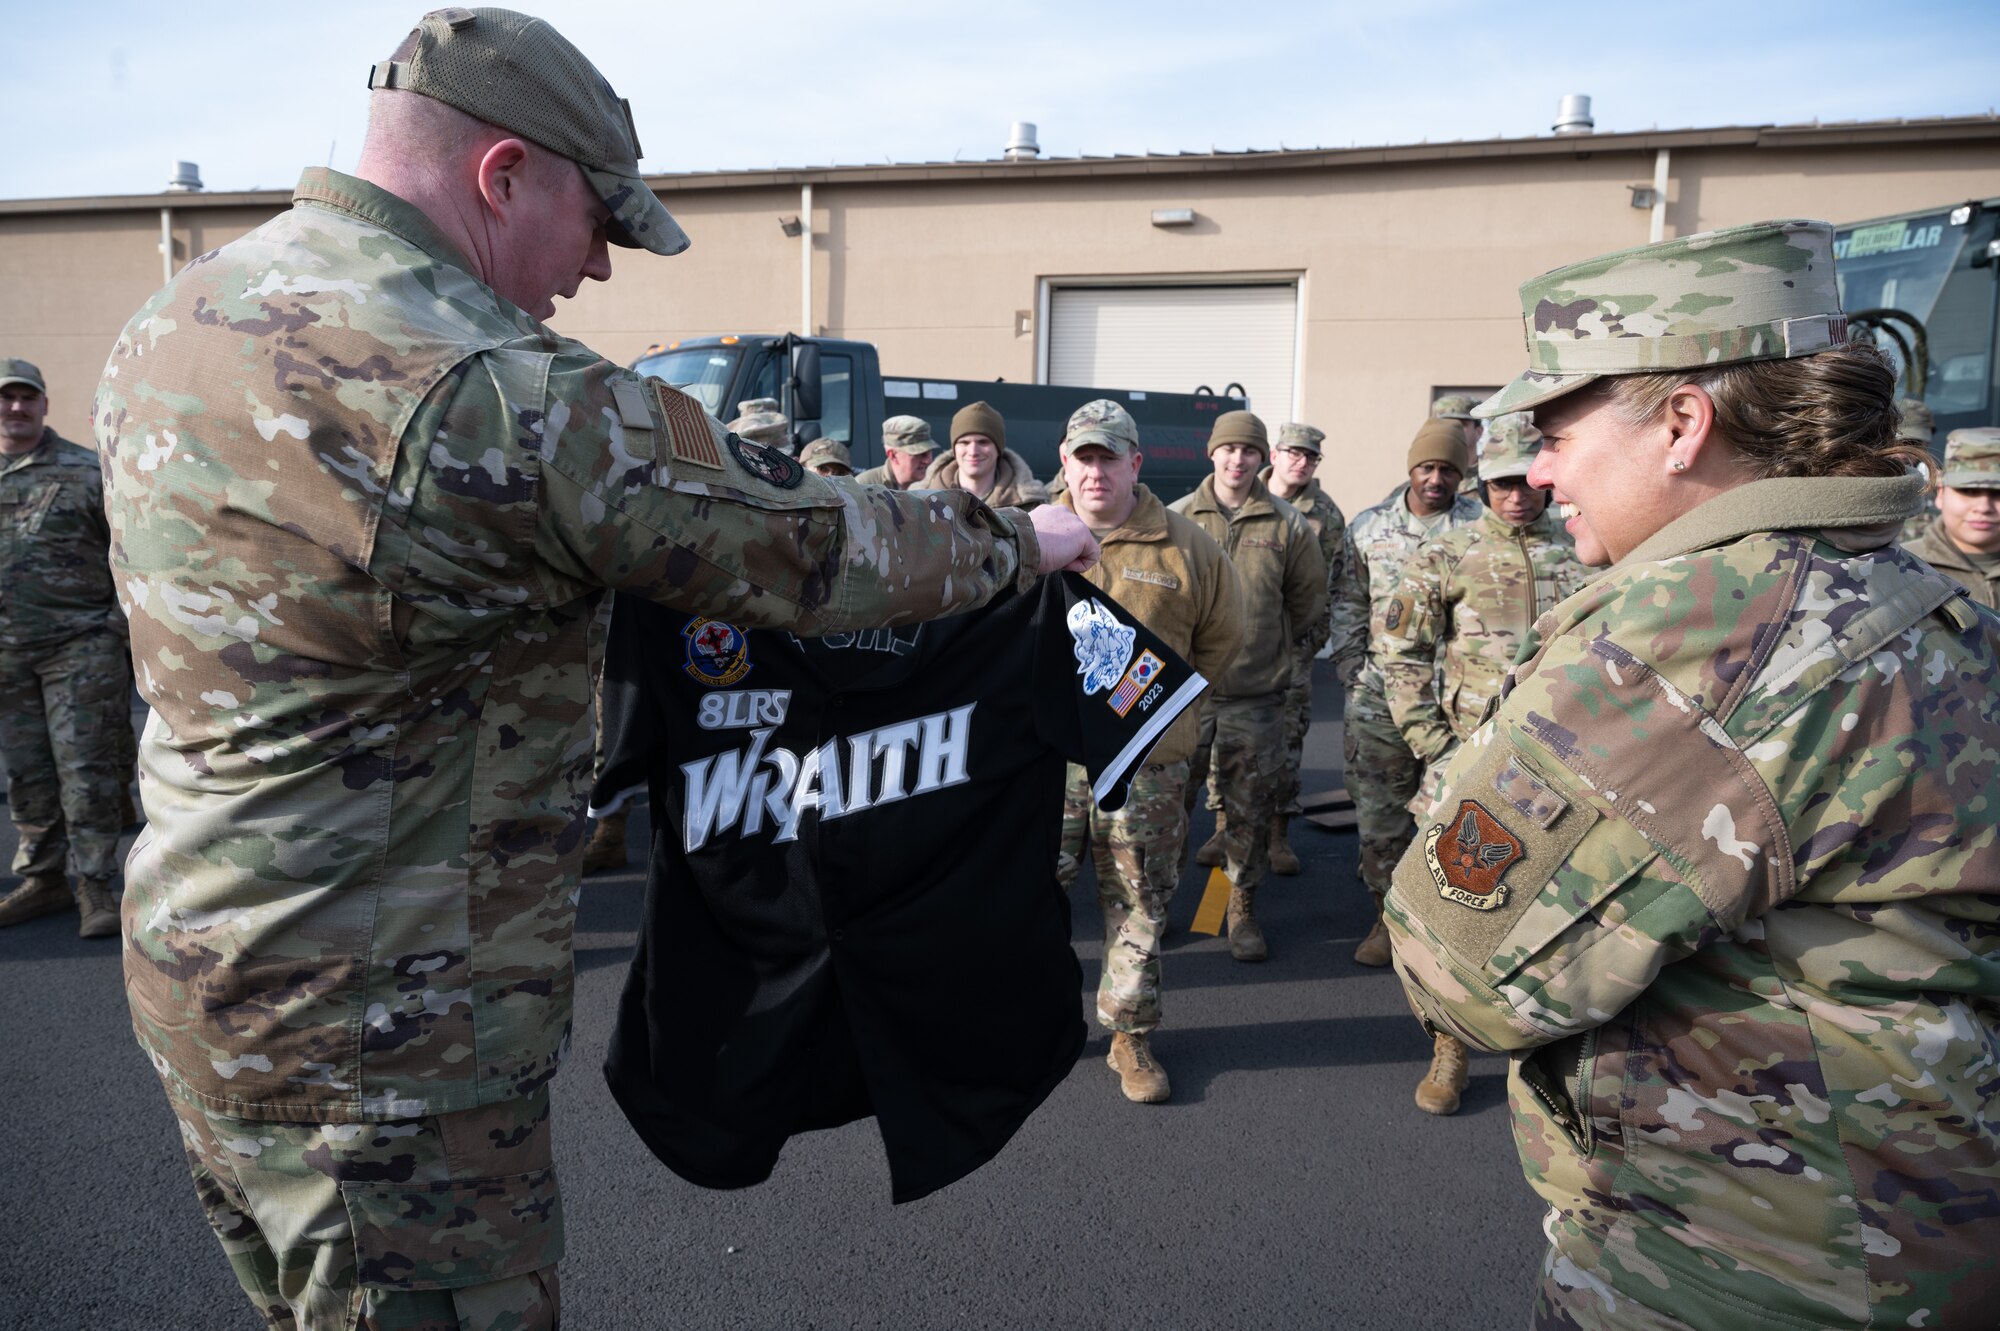 Lt. Col. Travis Rush (left), 8th Logistics Readiness Squadron commander, shows Maj. Gen. Linda S. Hurry, director of logistics, deputy chief of staff for logistics, engineering and force protection, Headquarters Air Force, an 8th LRS morale jersey, at Kunsan Air Base, Republic of Korea, Feb. 1, 2023. Hurry received the “Wraith Nation” jersey as a reminder of the logistics Airmen who operate out of Kunsan and to thank her for listening to their unit’s needs. (U.S. Air Force photo by Staff Sgt. Sadie Colbert)